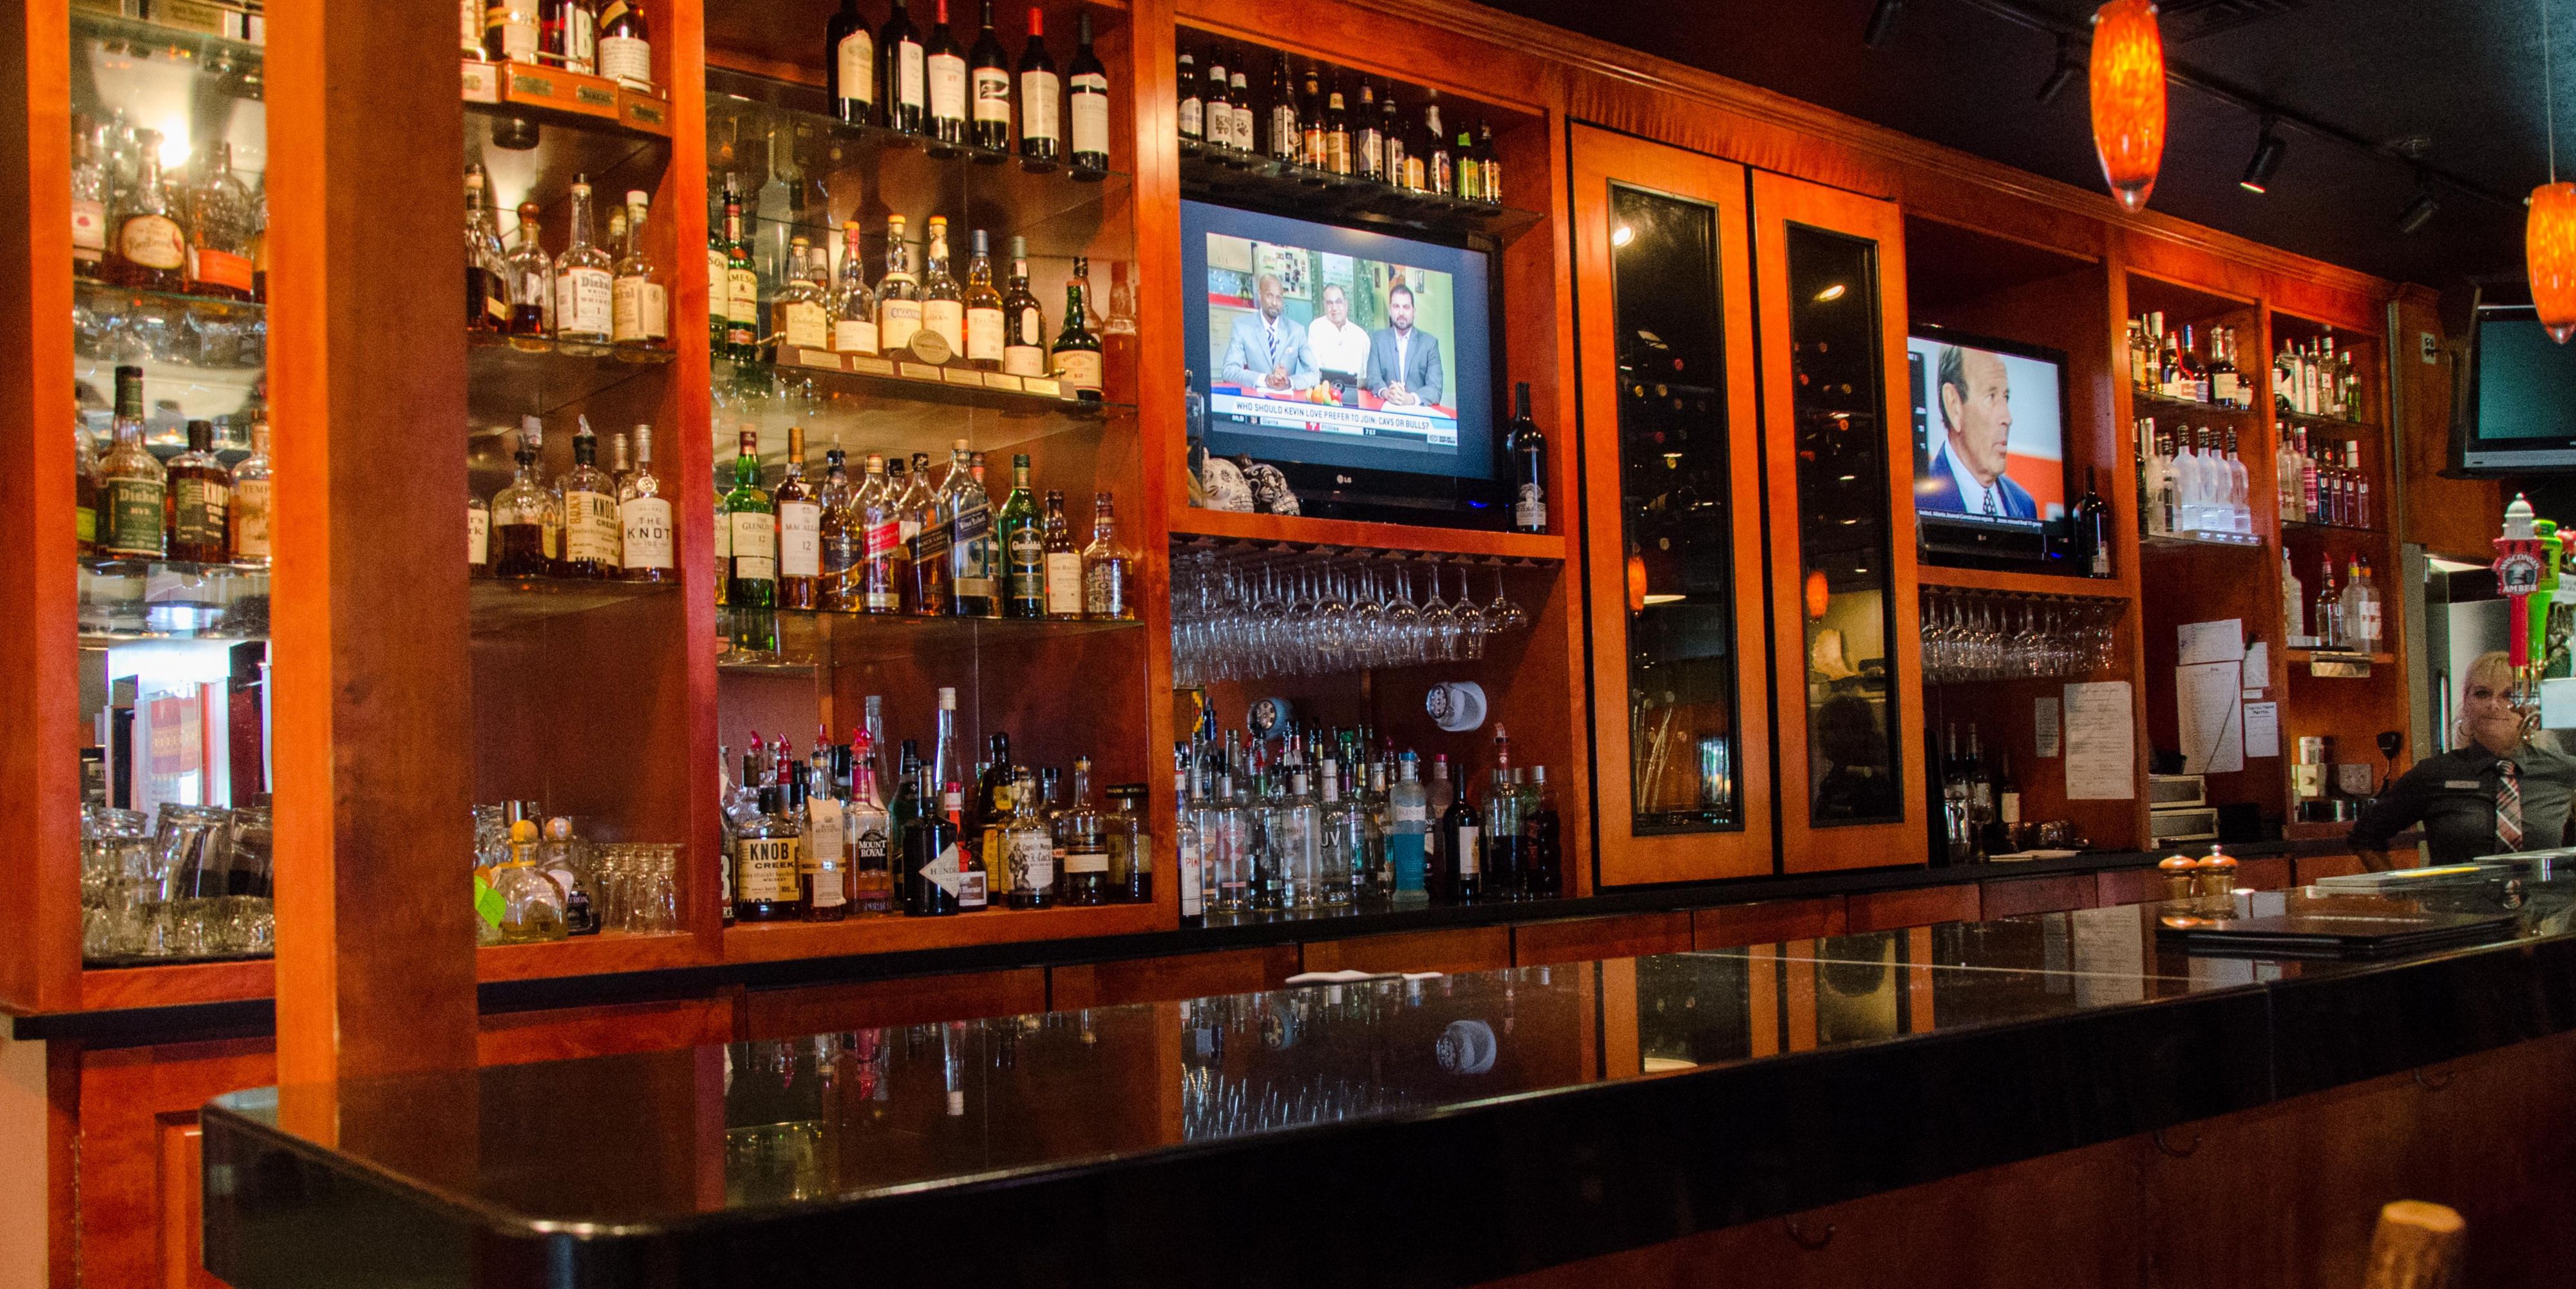 Grab a refreshing drink in the bar at Thunder Bay Grille